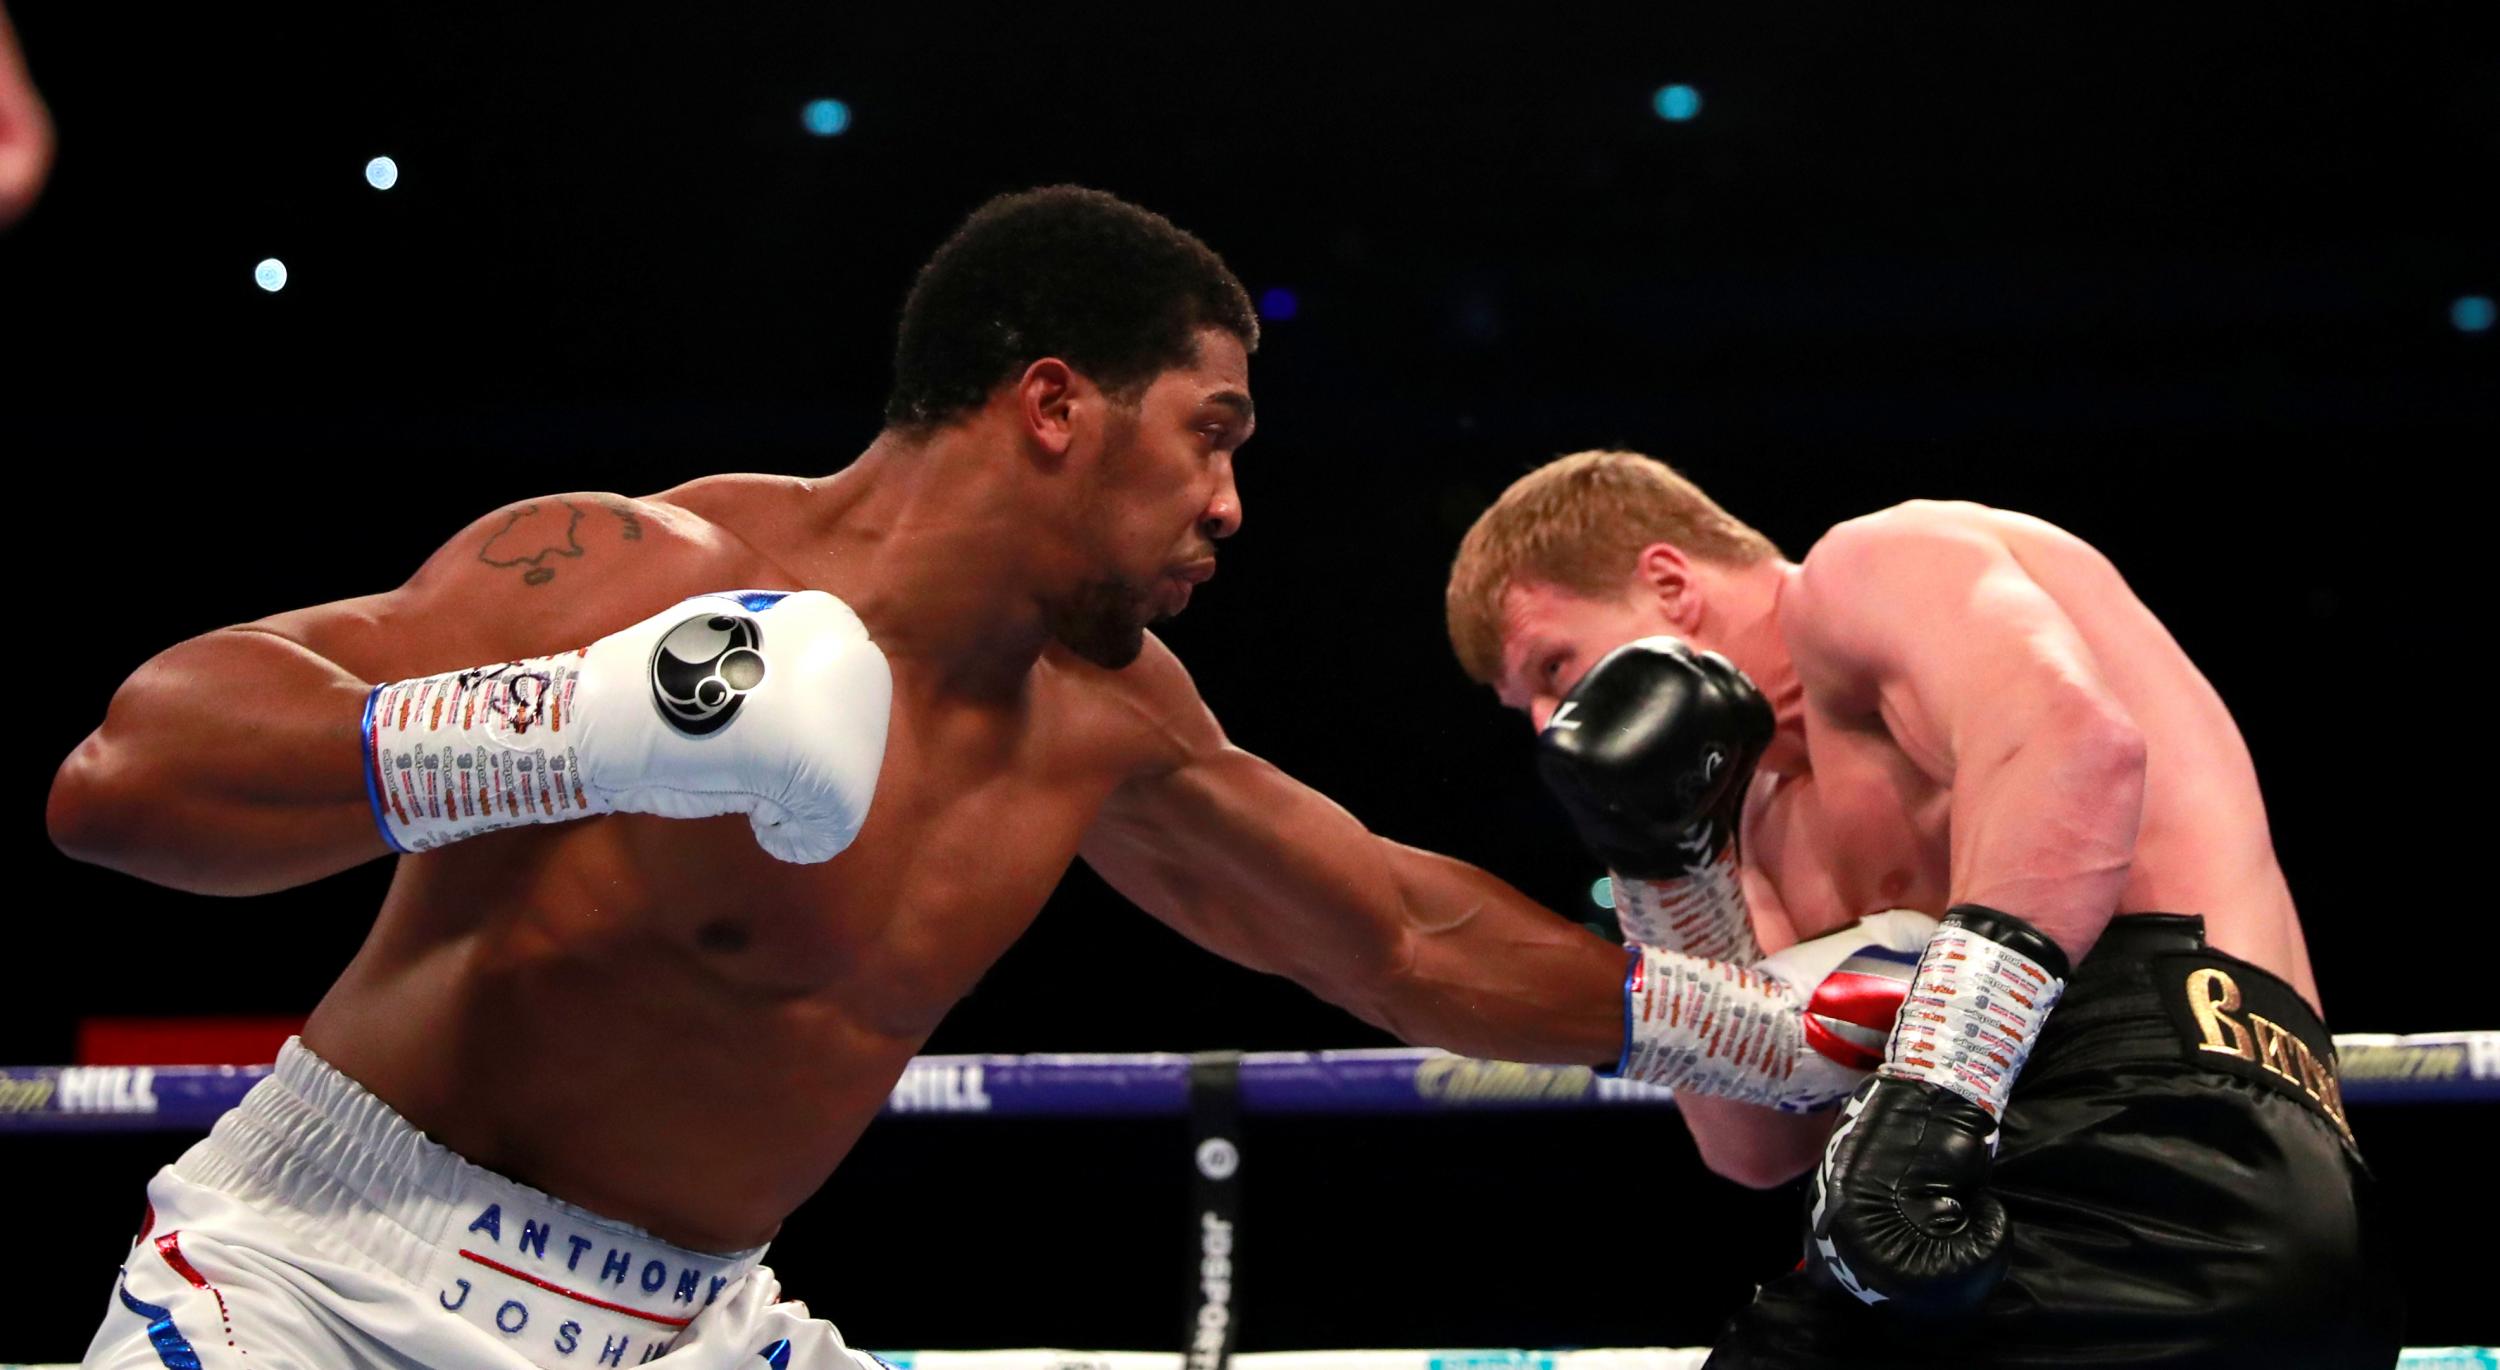 Joshua vs Povetkin live stream: Free feeds of fight on Facebook and Twitter prompt warnings about risks